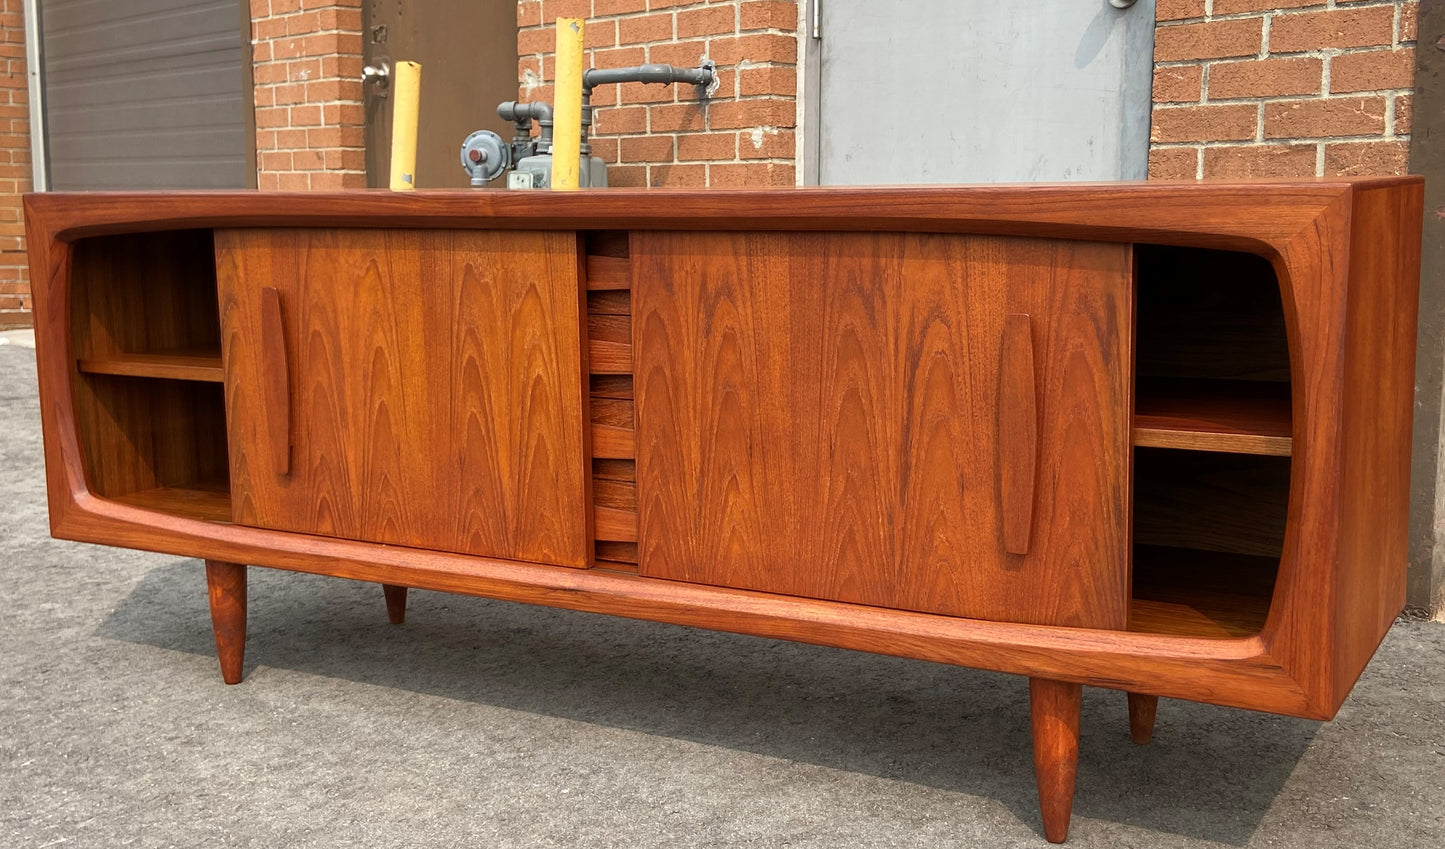 REFINISHED Danish MCM Teak sideboard Credenza TV Console 6 ft PERFECT